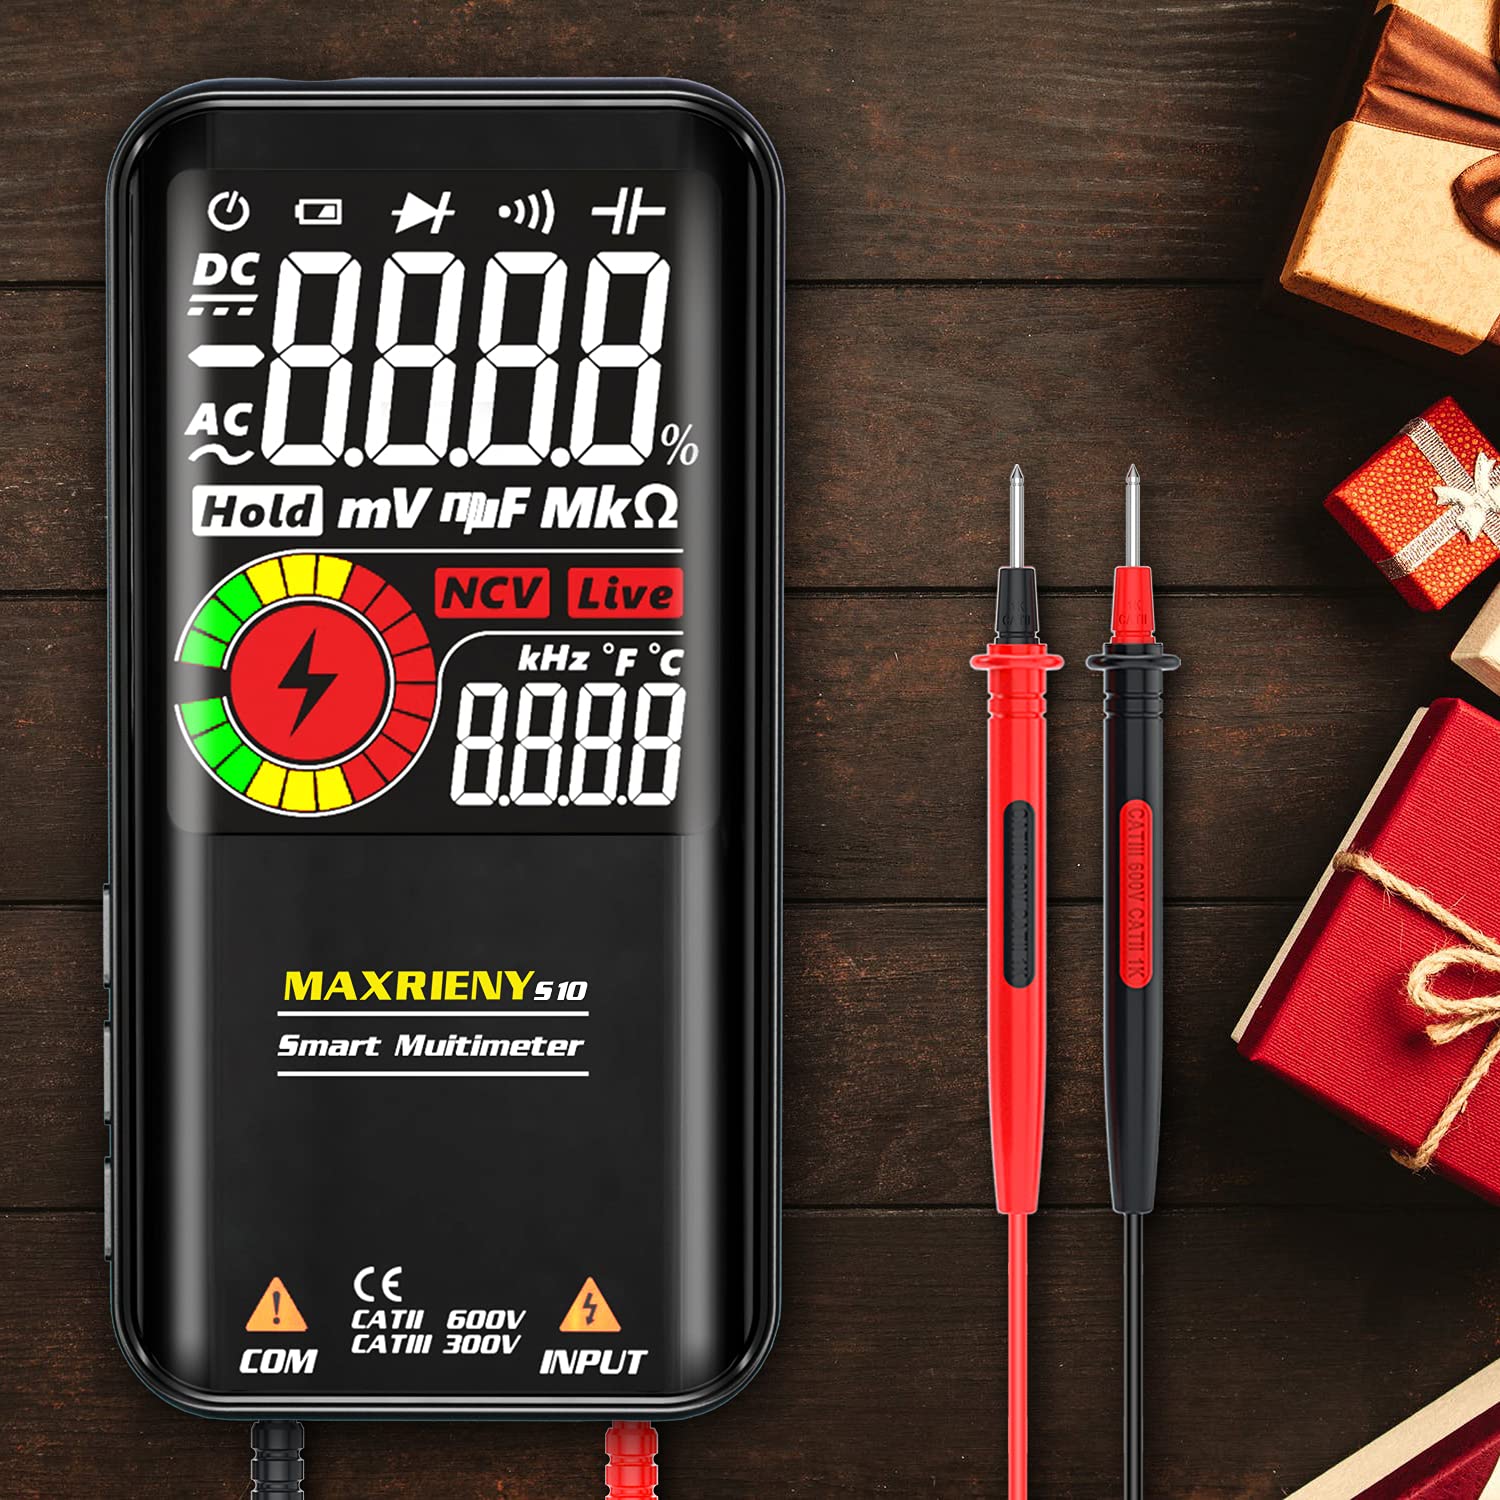 MAXRIENY Digital Multimeter, Color LCD with Smart Mode, 3 Results Display 9999 Counts Auto-Ranging Pocket Voltmeter Capacitance Ohm Continuity Frequency Diode Duty Cycle Live Check Voltage Tester